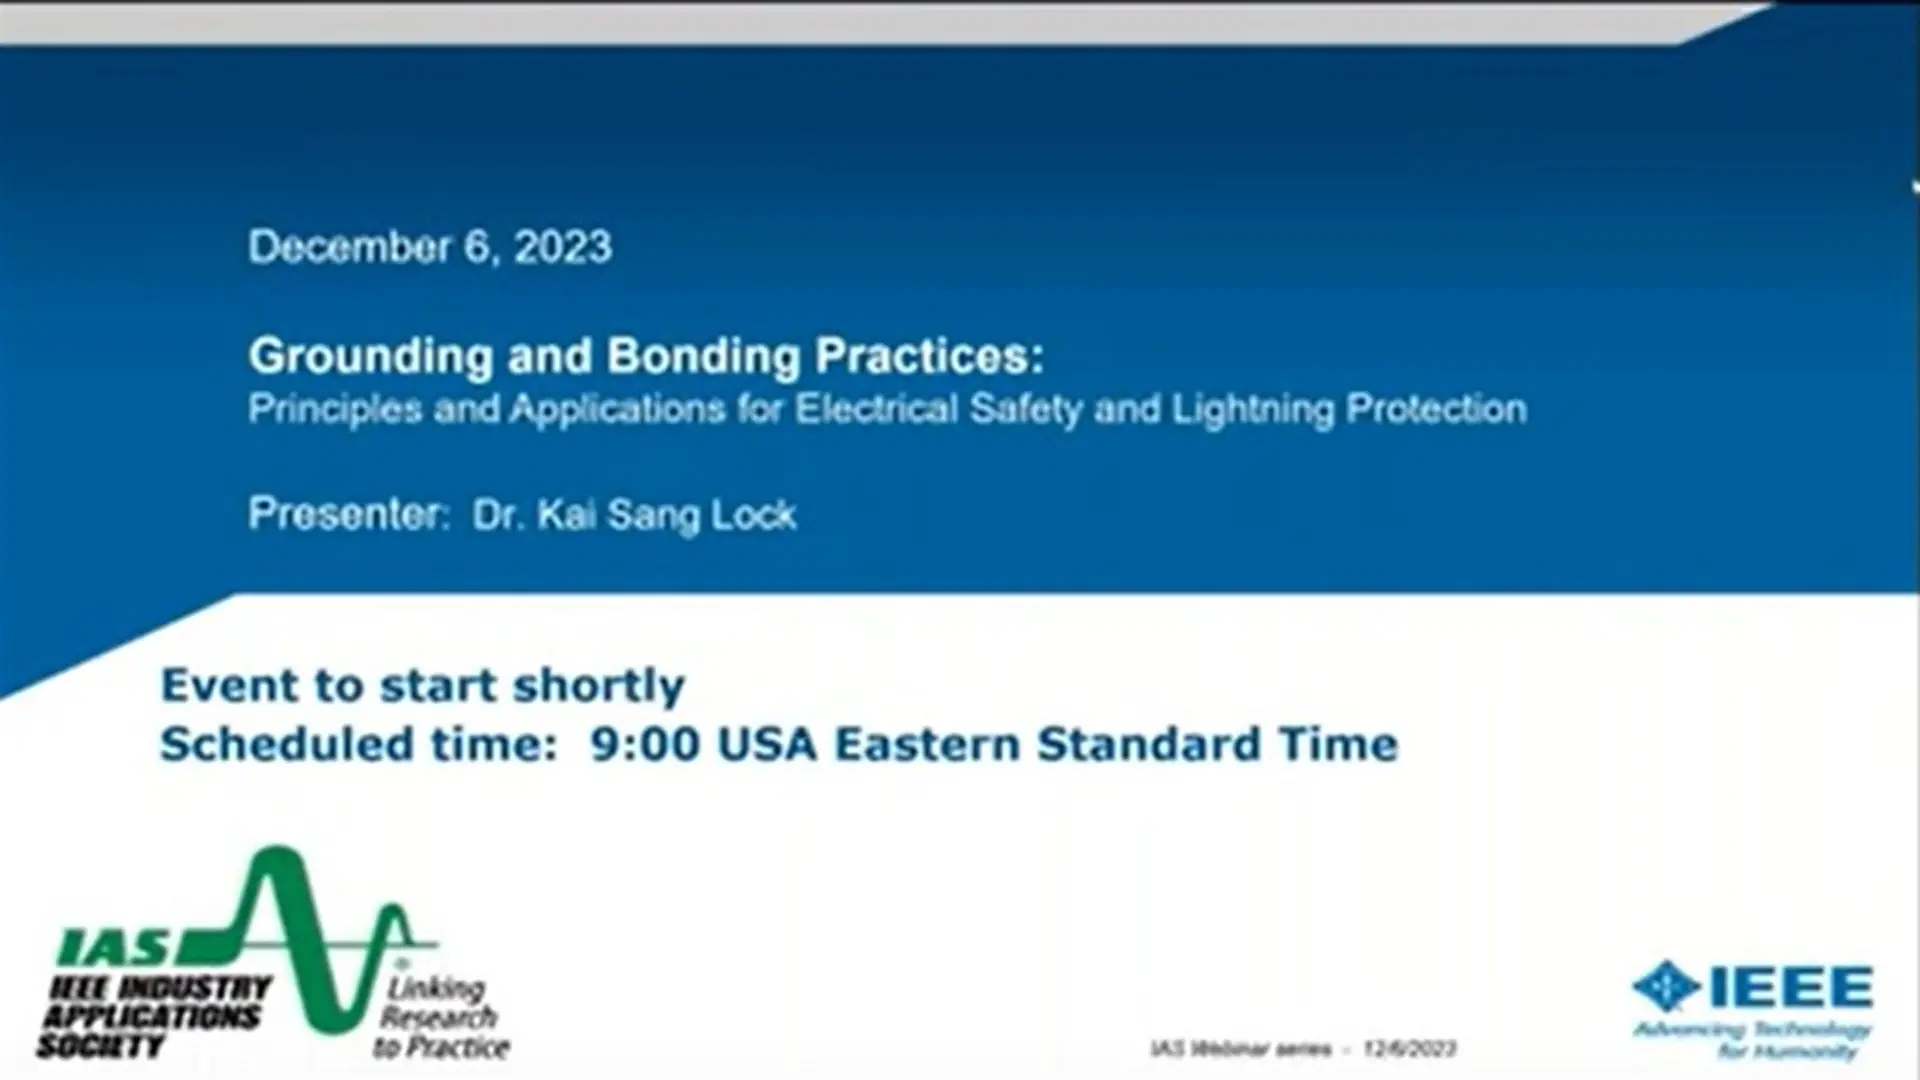 Grounding and Bonding Practices: Principles and Applications for Electrical Safety and Lightning Protection